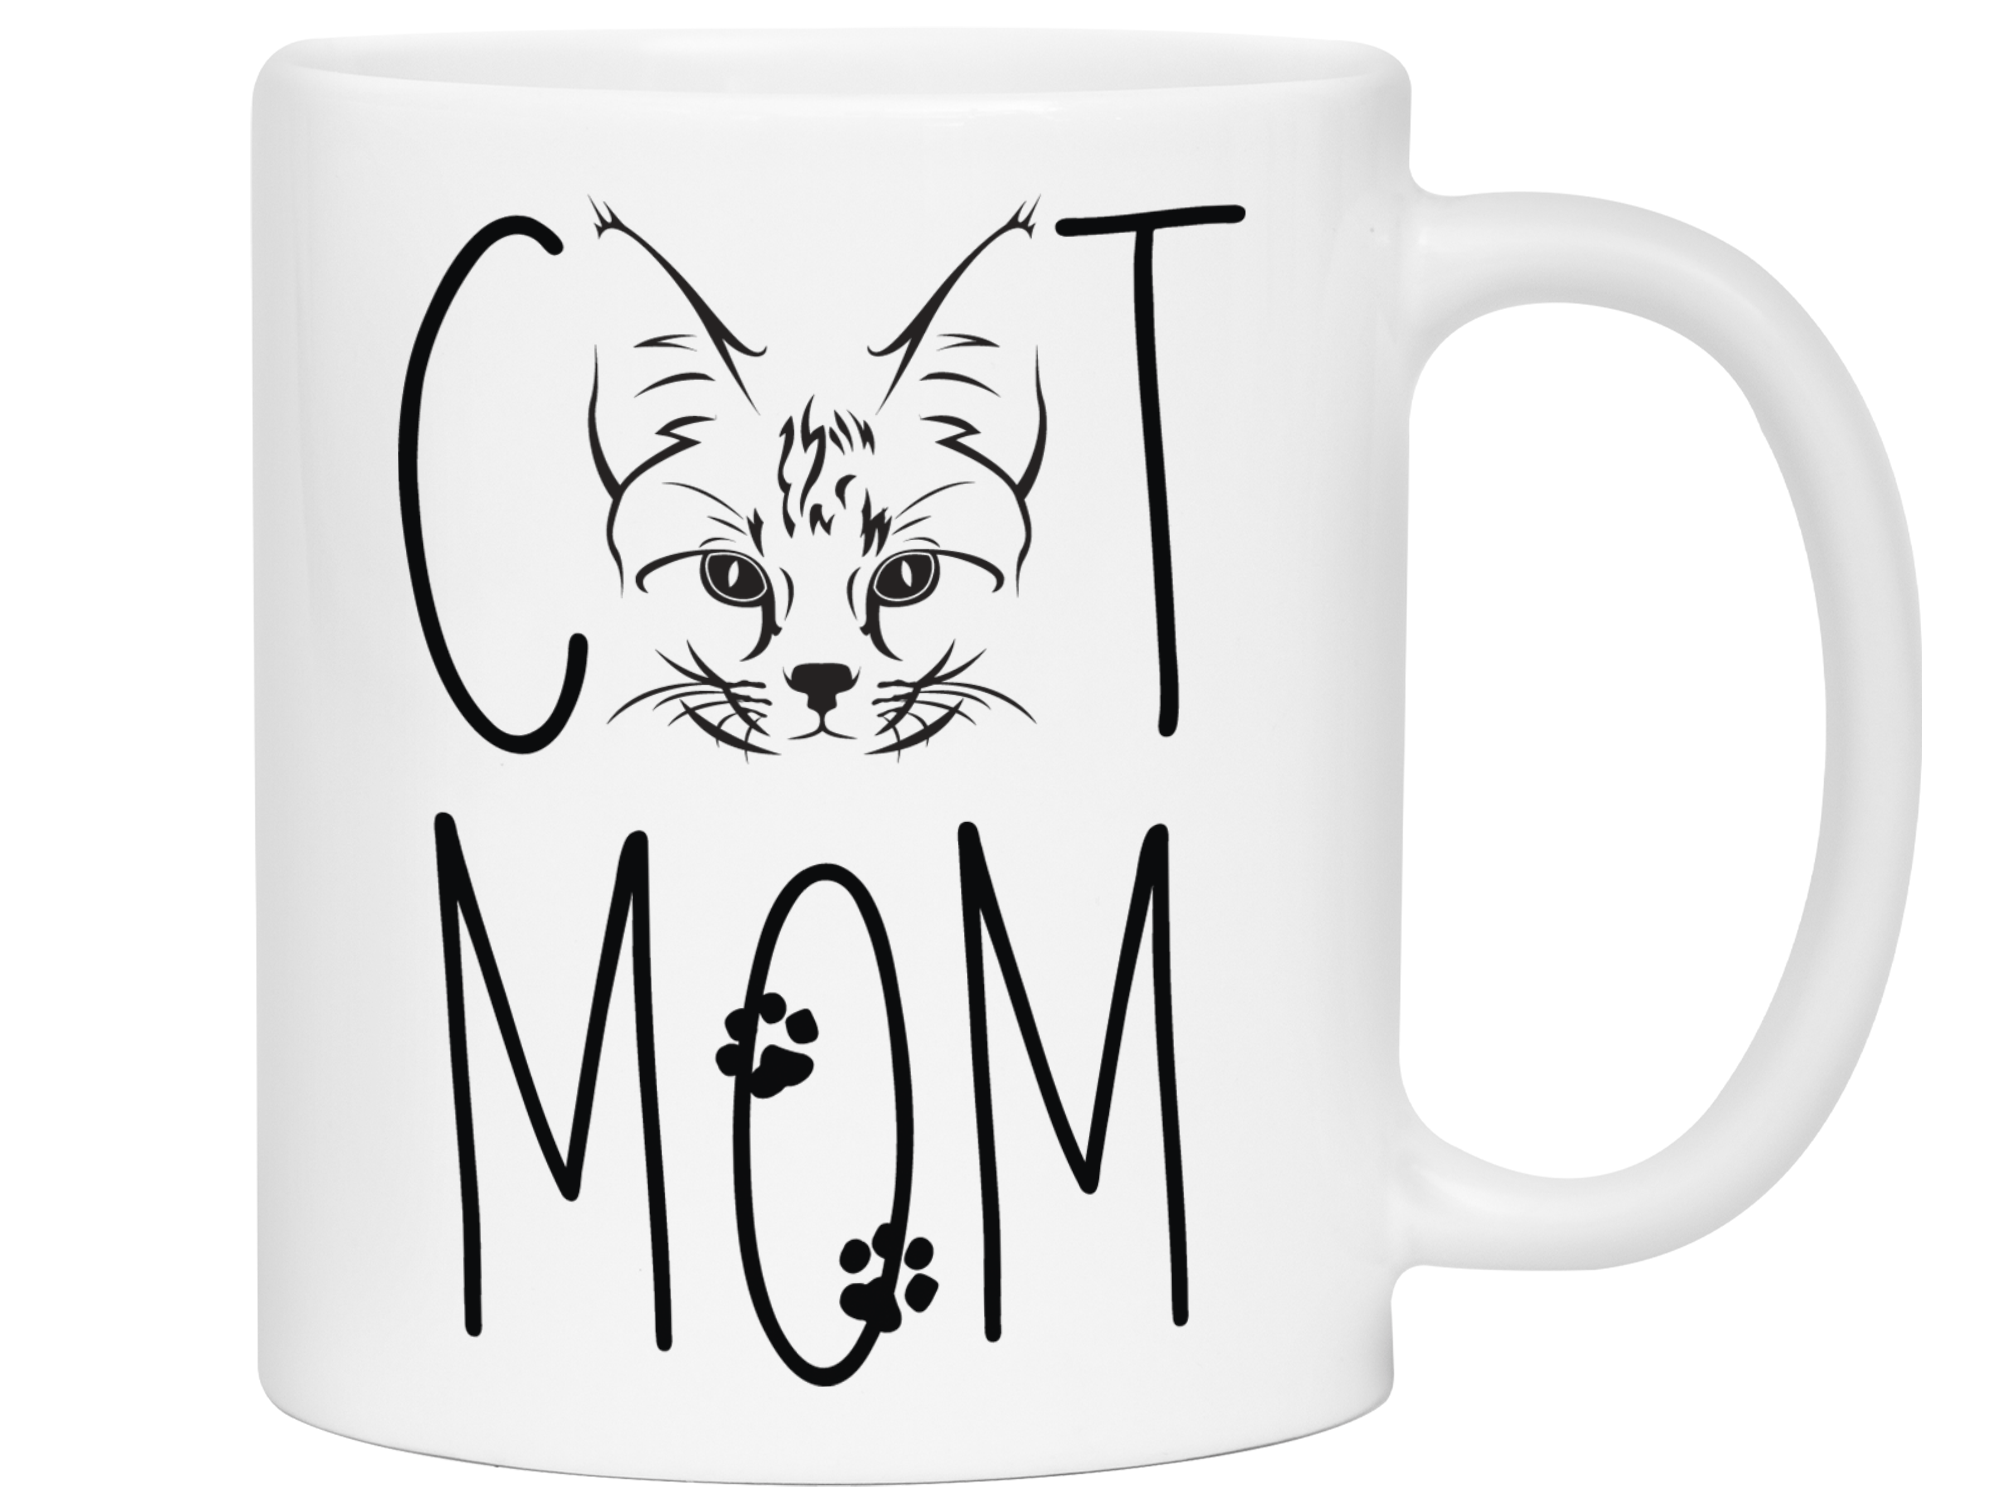 Cat Mom Gifts - Cat Mom Coffee Mug - Mother's Day Gift Idea for Cat Mom